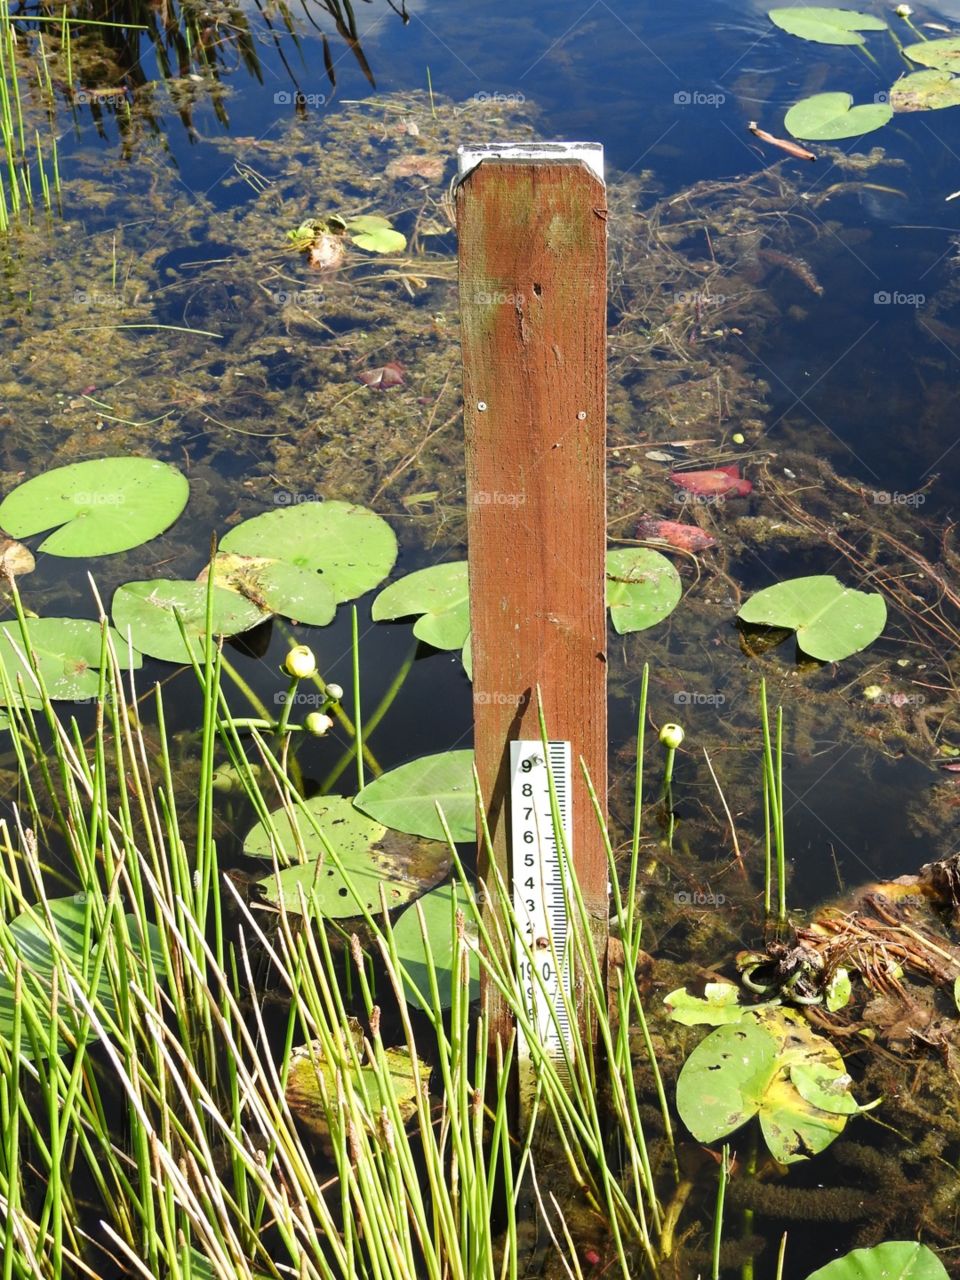 Measuring the lily pond